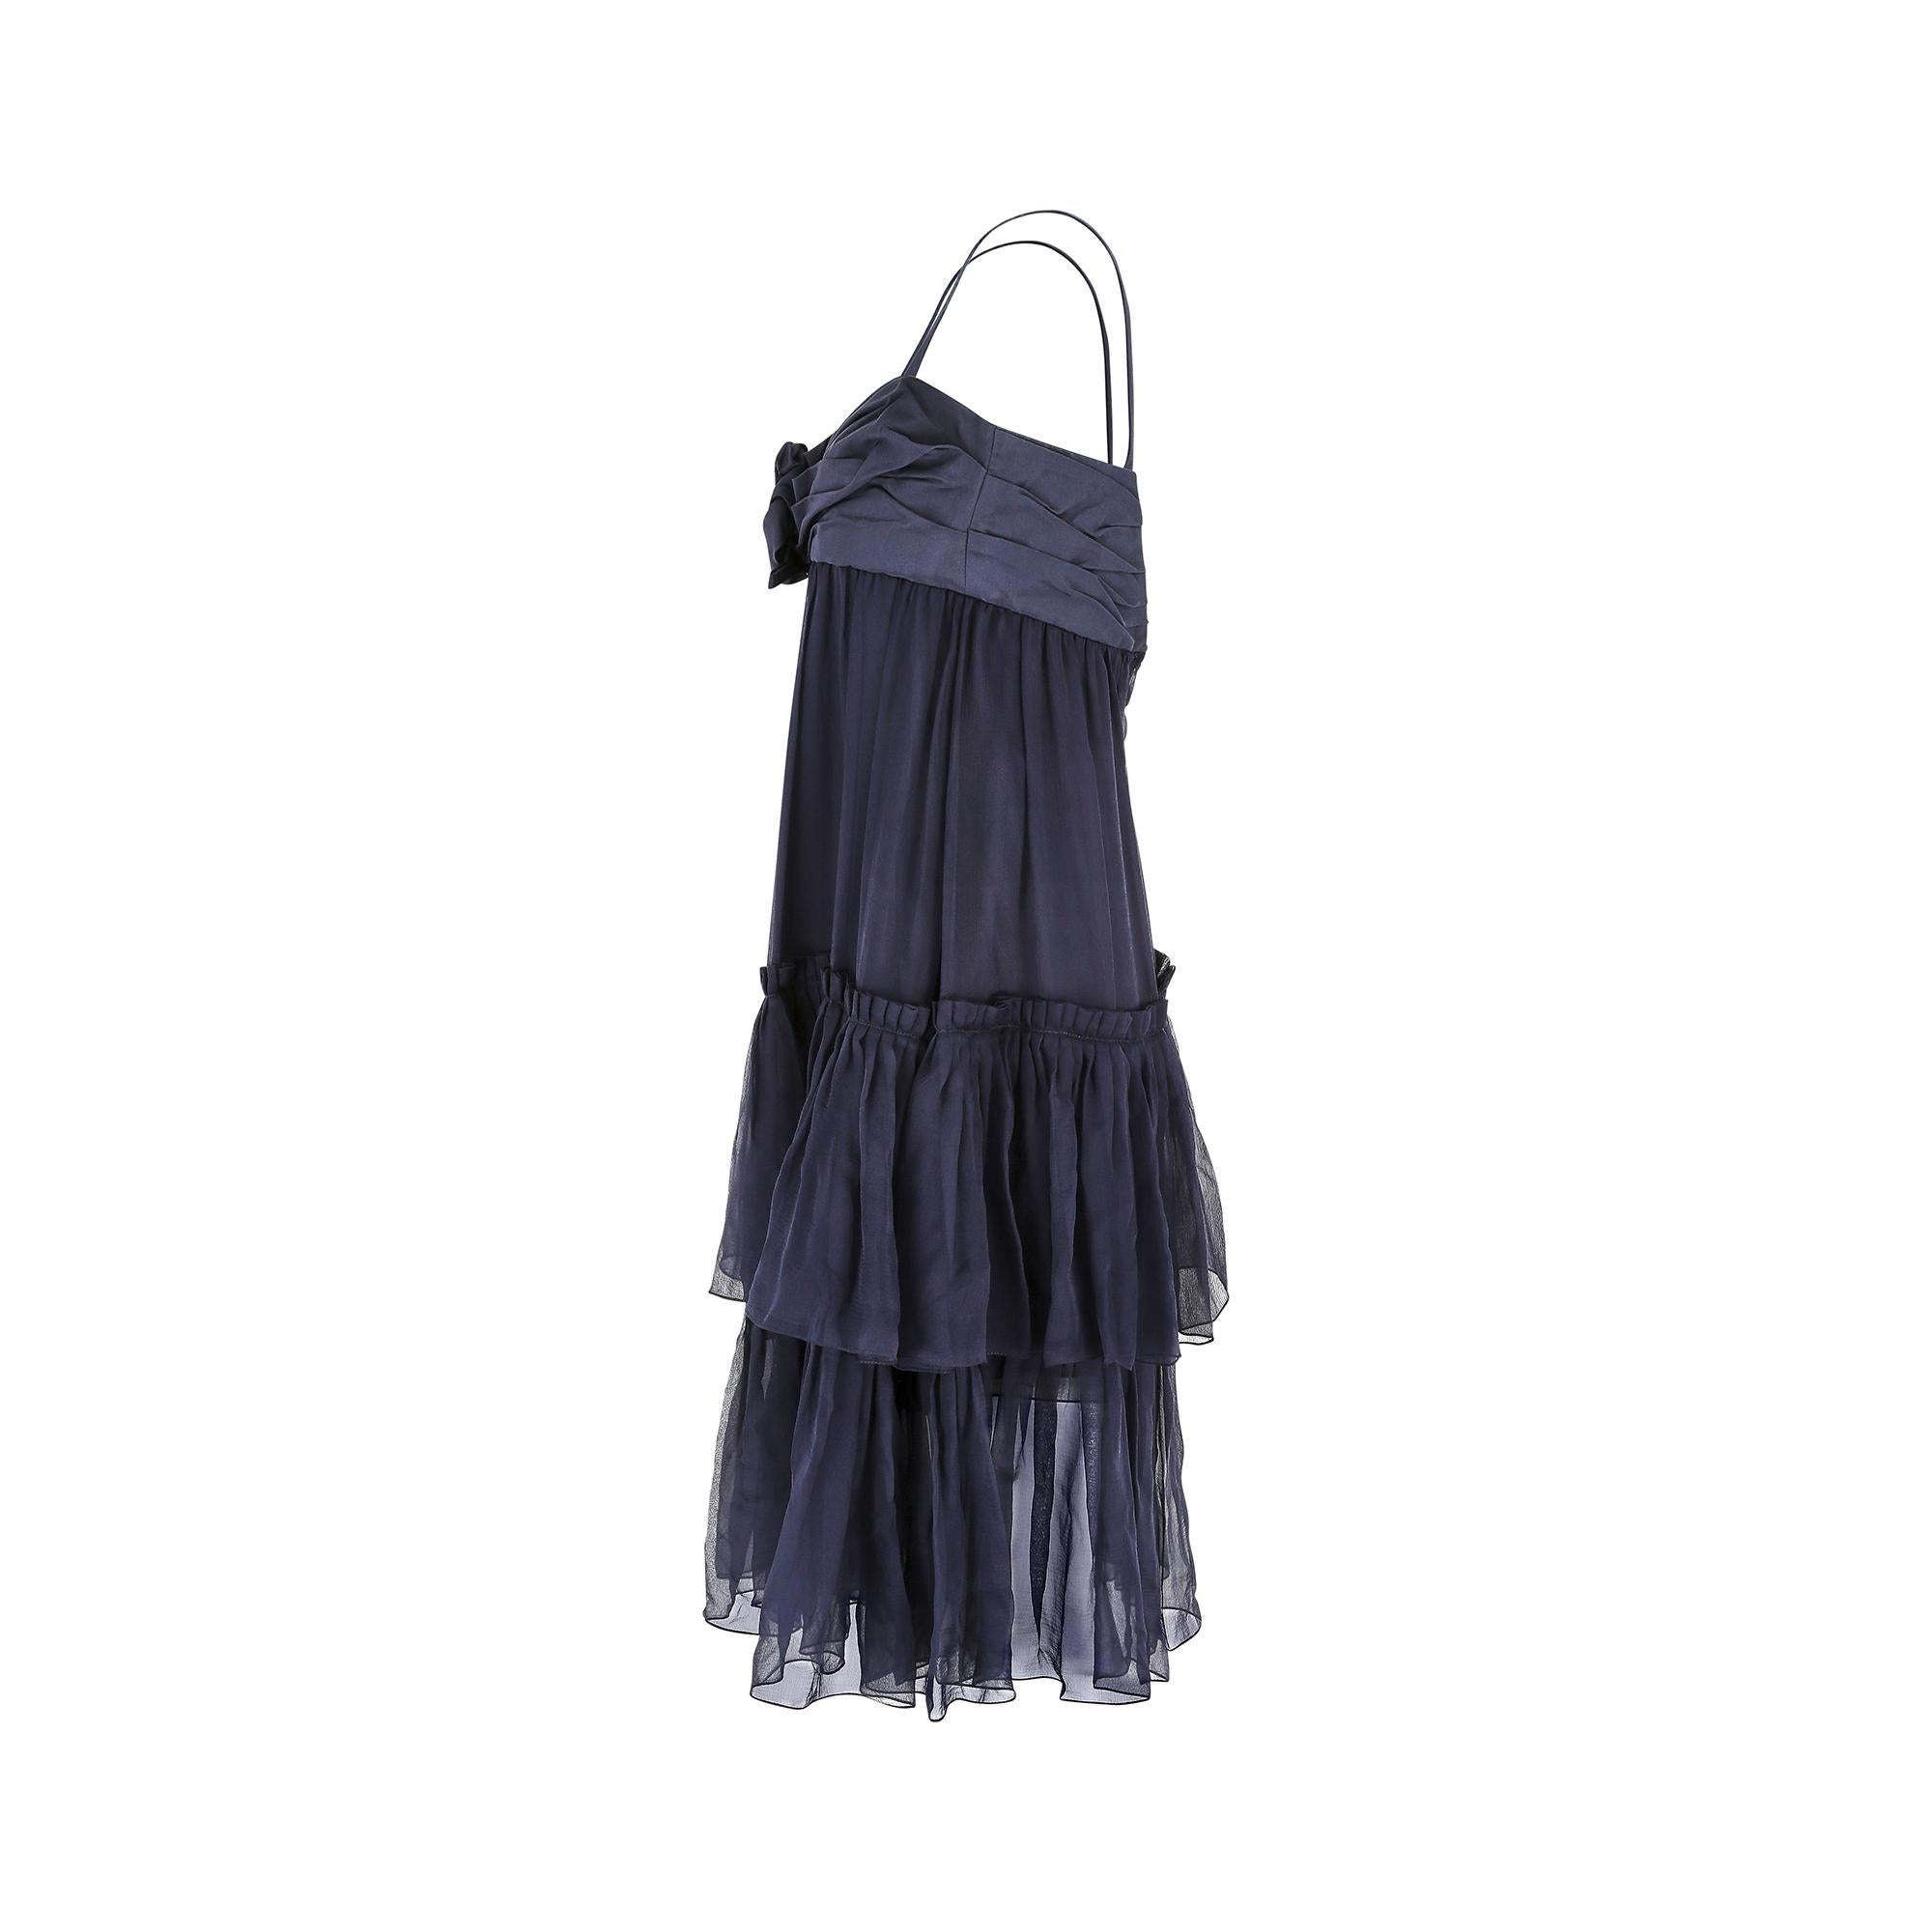 2008 Christian Dior Navy Silk Chiffon Babydoll Dress In Excellent Condition For Sale In London, GB